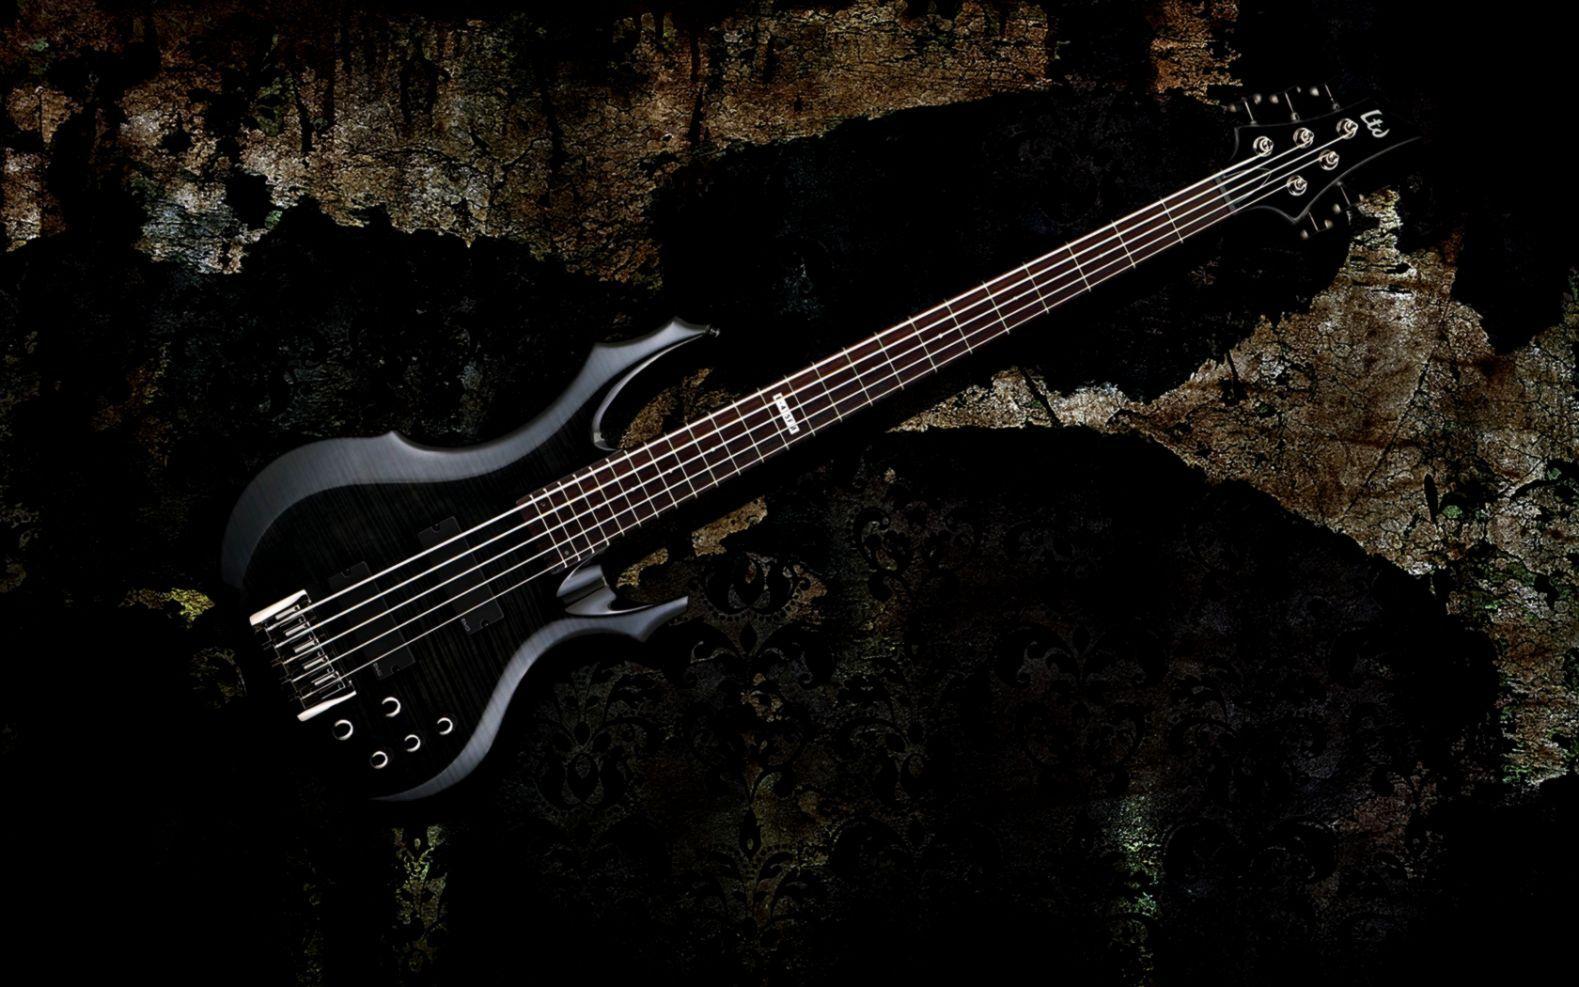 Bass Guitar Full HD HDTV 1080p 169 Wallpapers HD Bass Guitar 1920x1080  Backgrounds Free Images Download